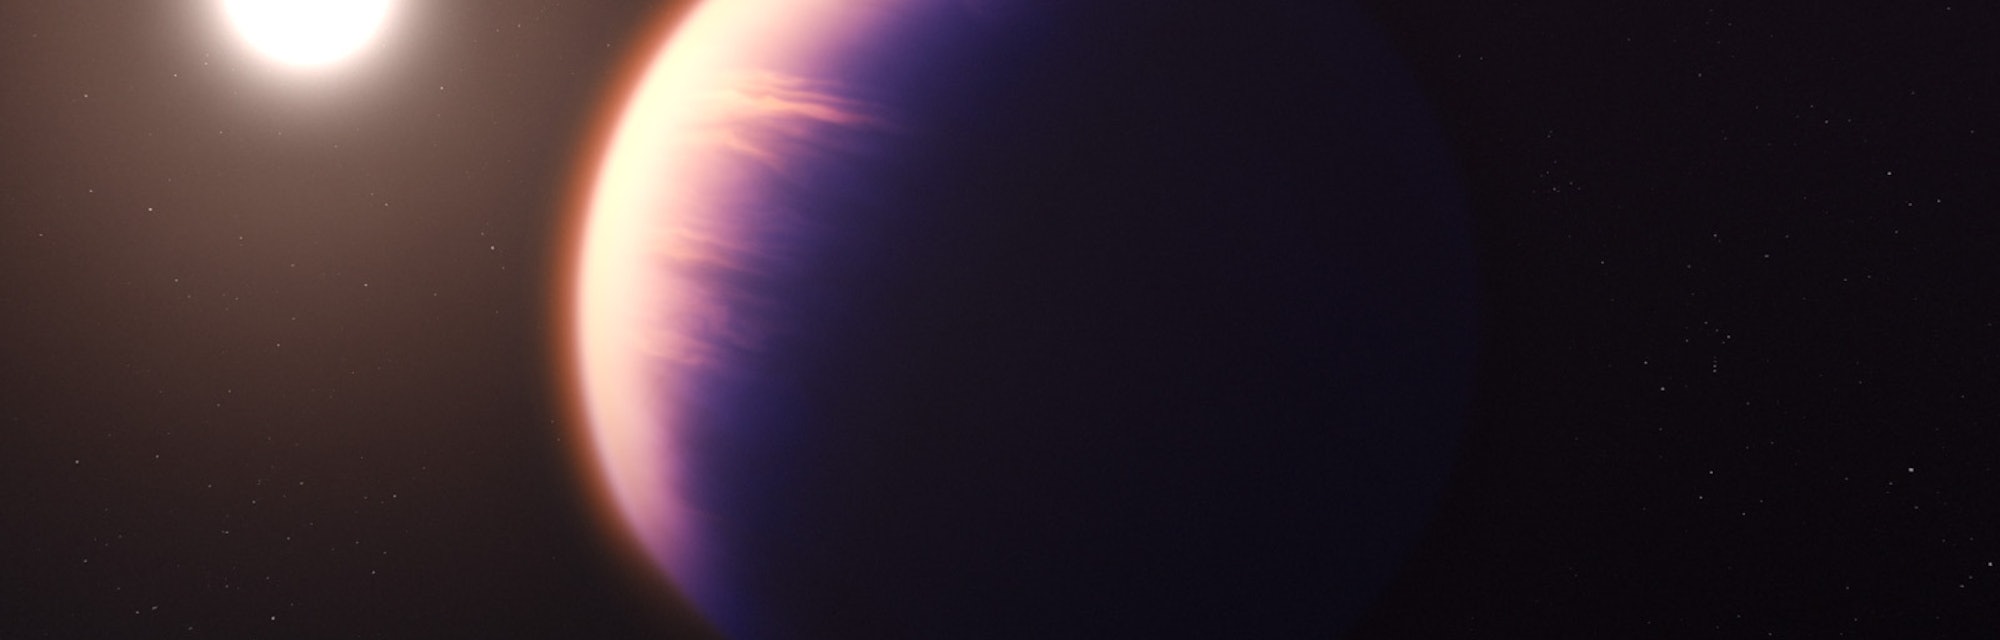 large jupiter-like planet glowing from light of a nearby star